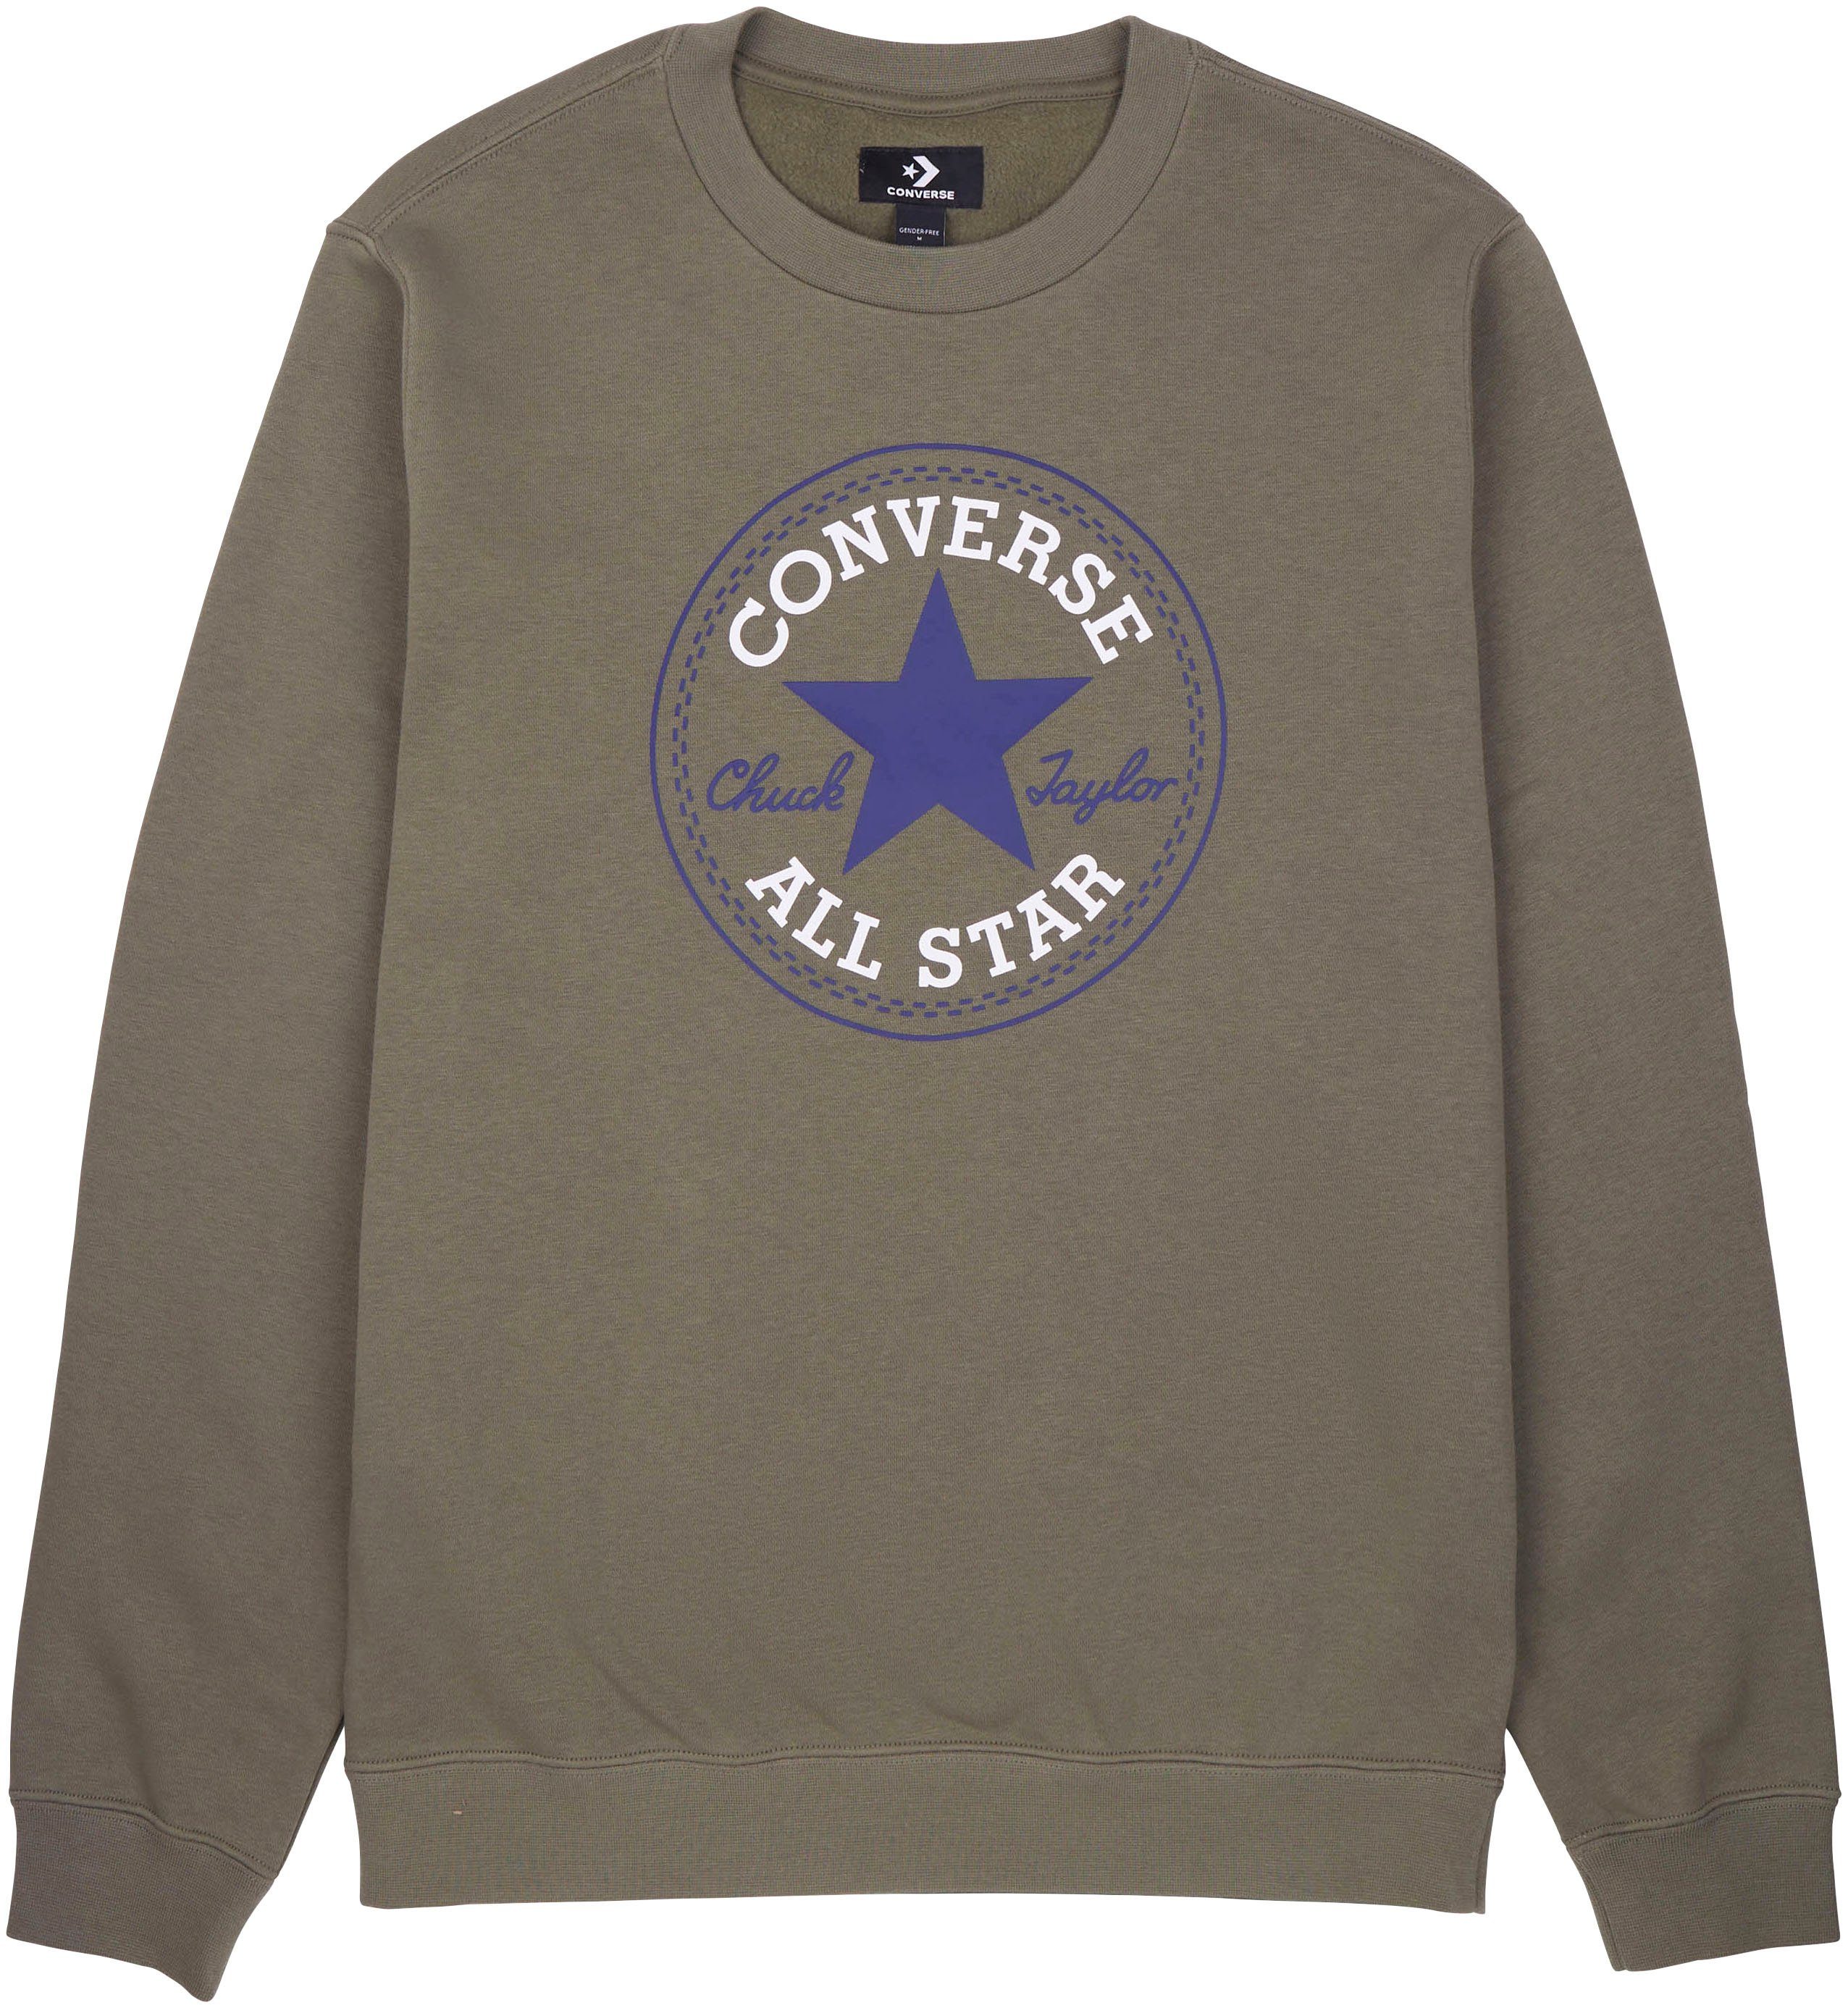 Converse Sweatshirt UNISEX PATCH BRUSHED BACK olive STAR ALL